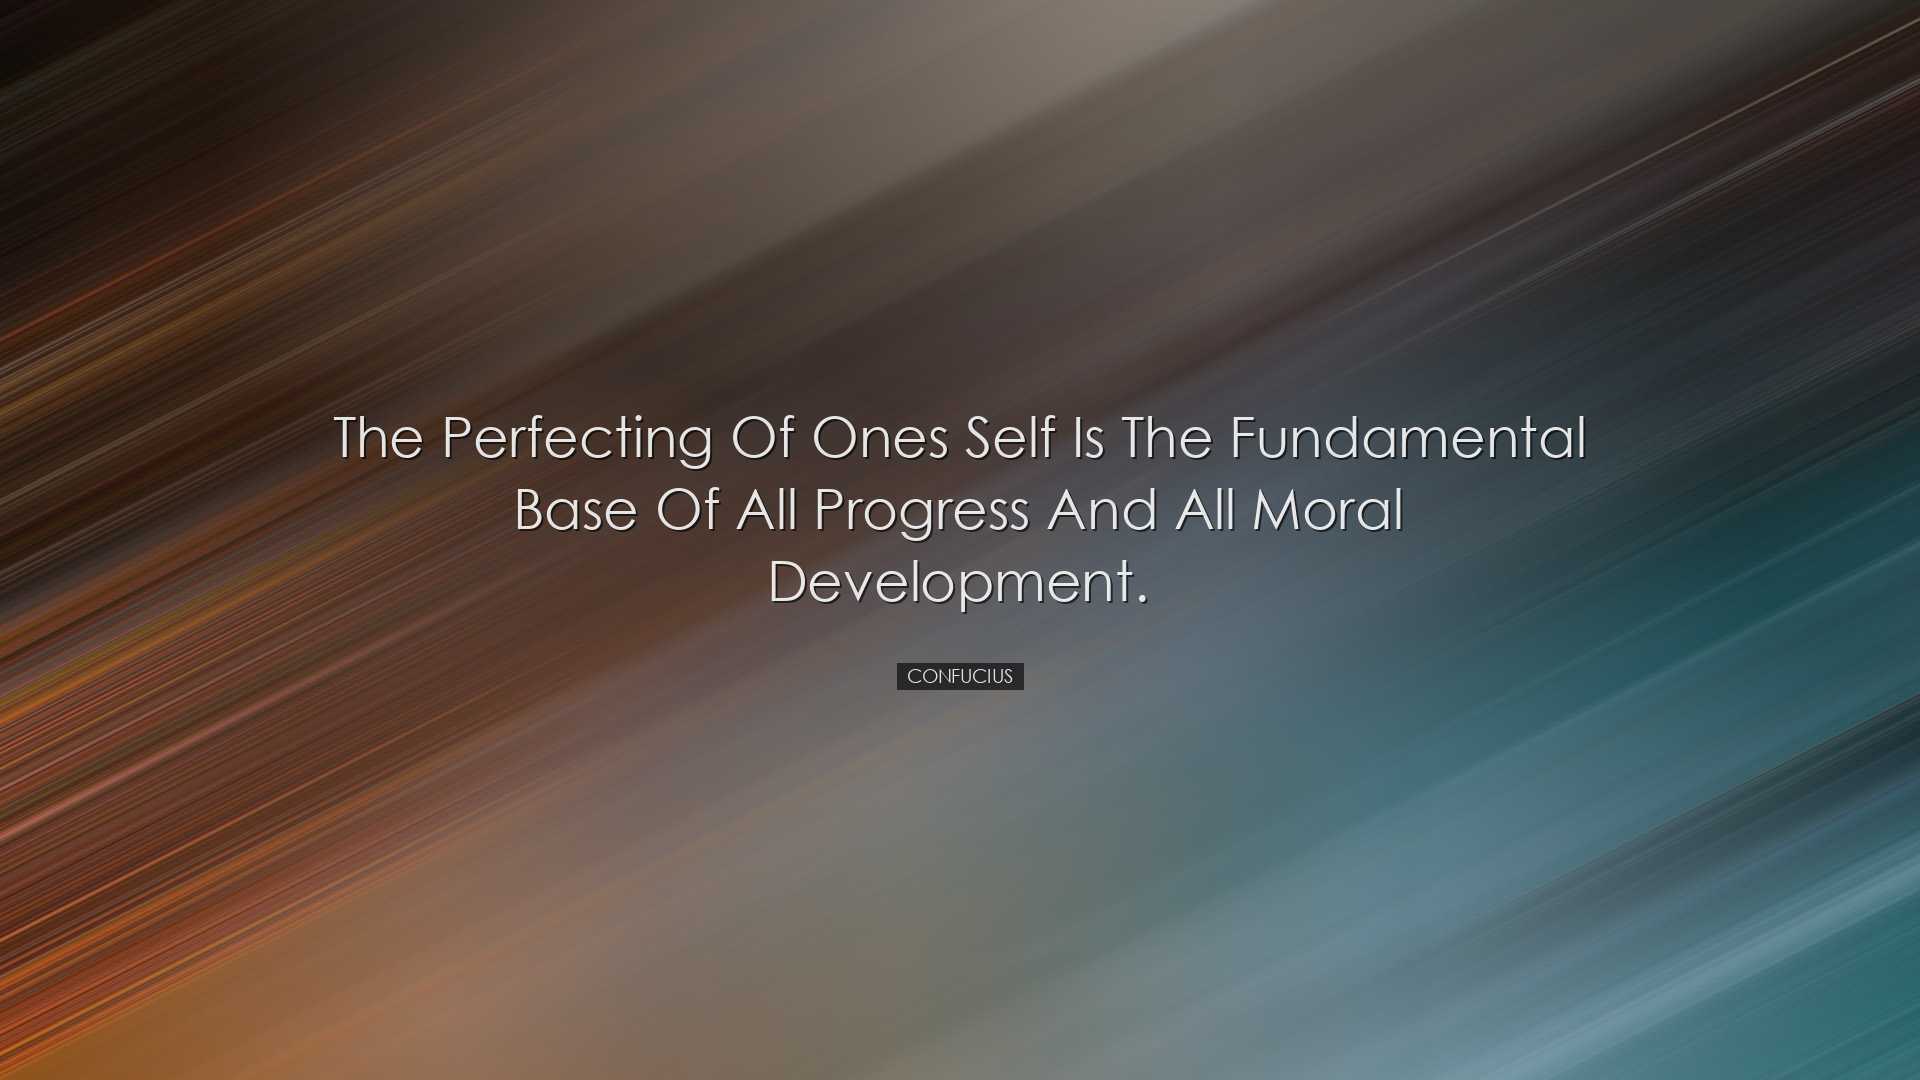 The perfecting of ones self is the fundamental base of all progres